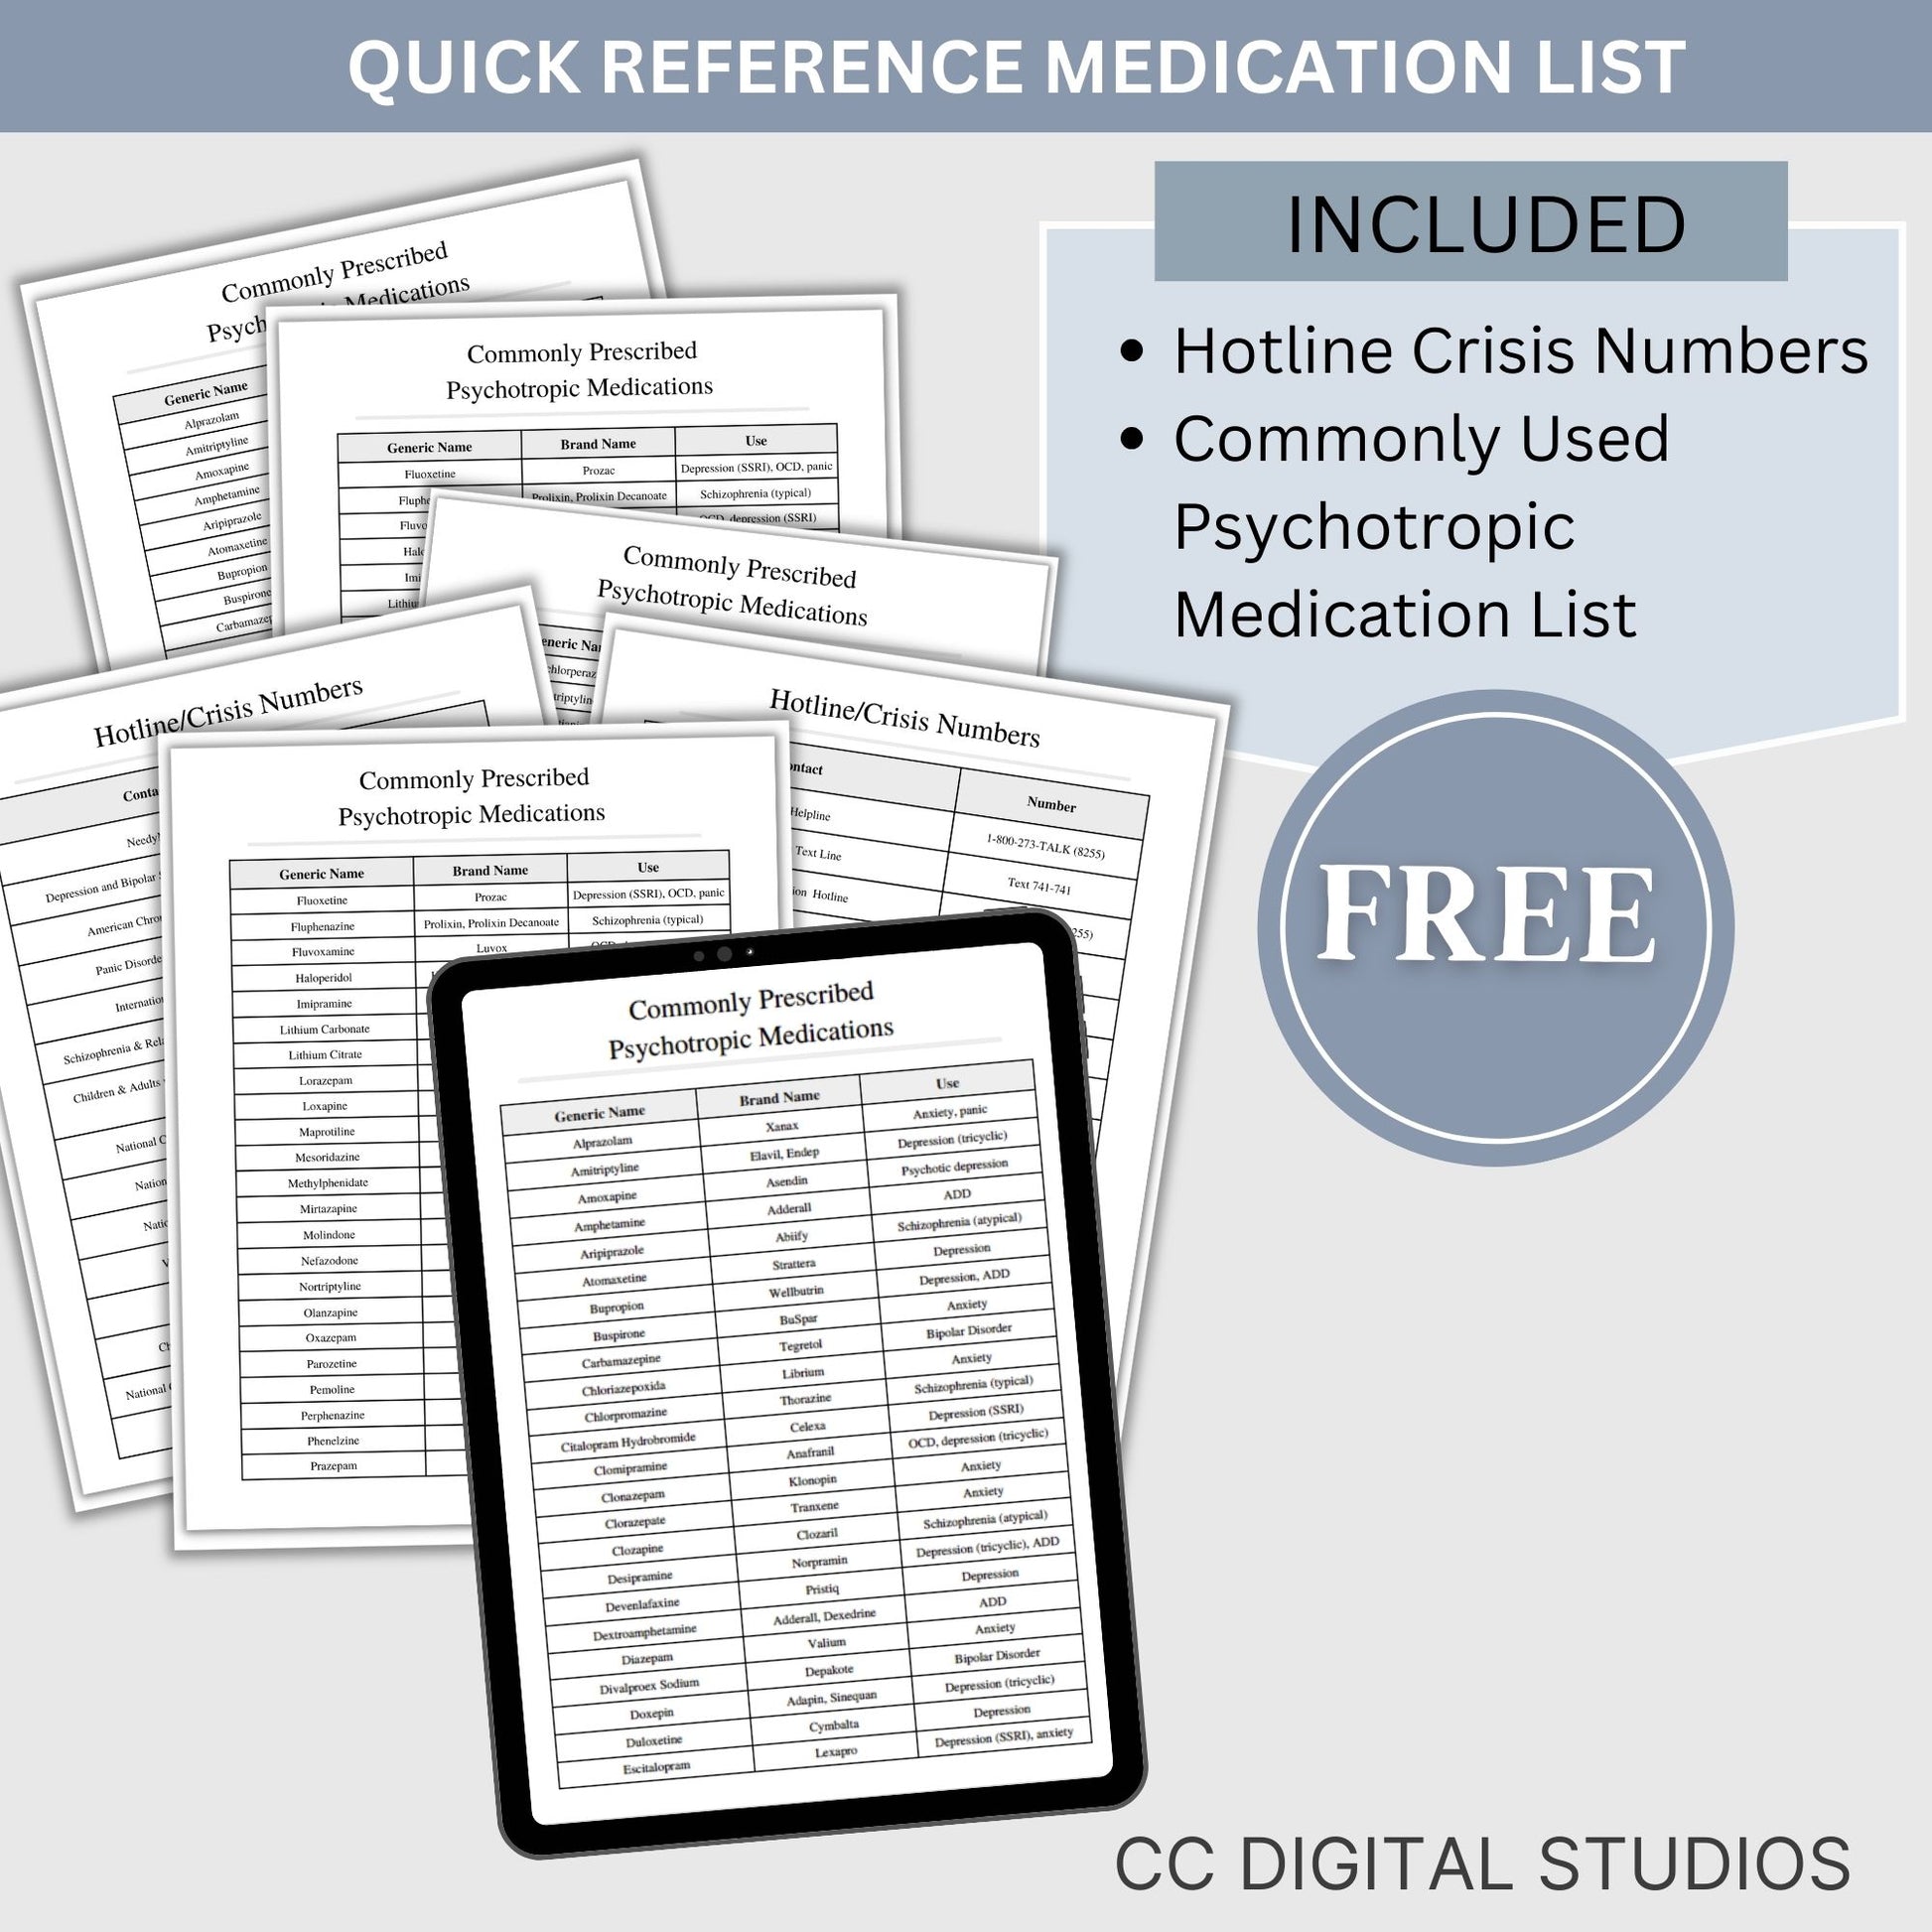 56 pages of mental health code reference sheets for common behavioral health material; ICD-10 Codes, DSM-5 Codes, CPT Codes, and Z codes. FREE commonly used medication lists and hotline numbers.